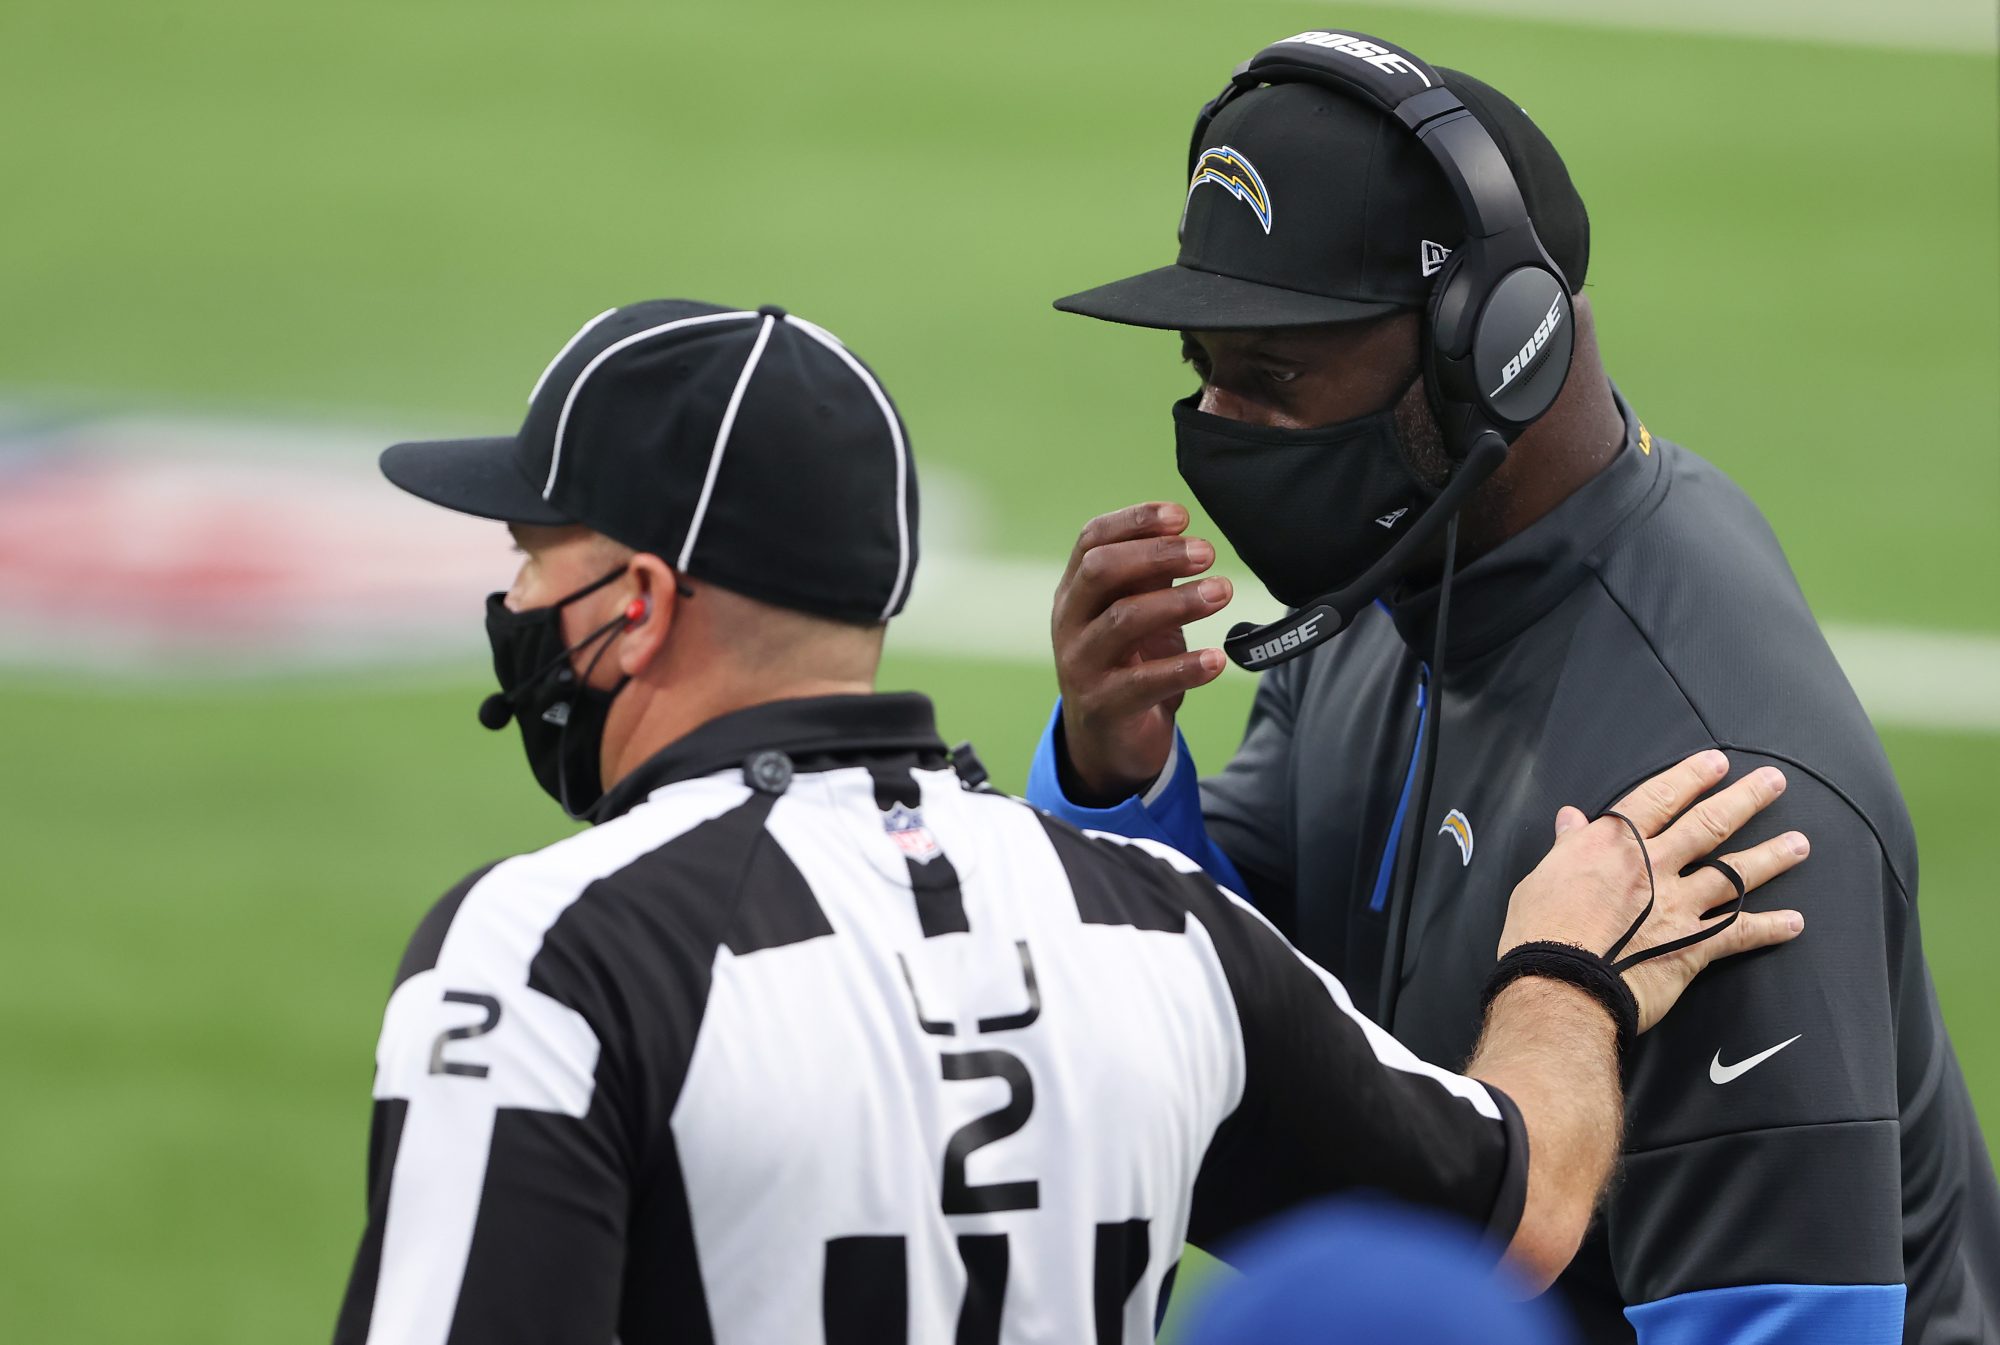 Chargers head coach Anthony Lynn talks with an official.